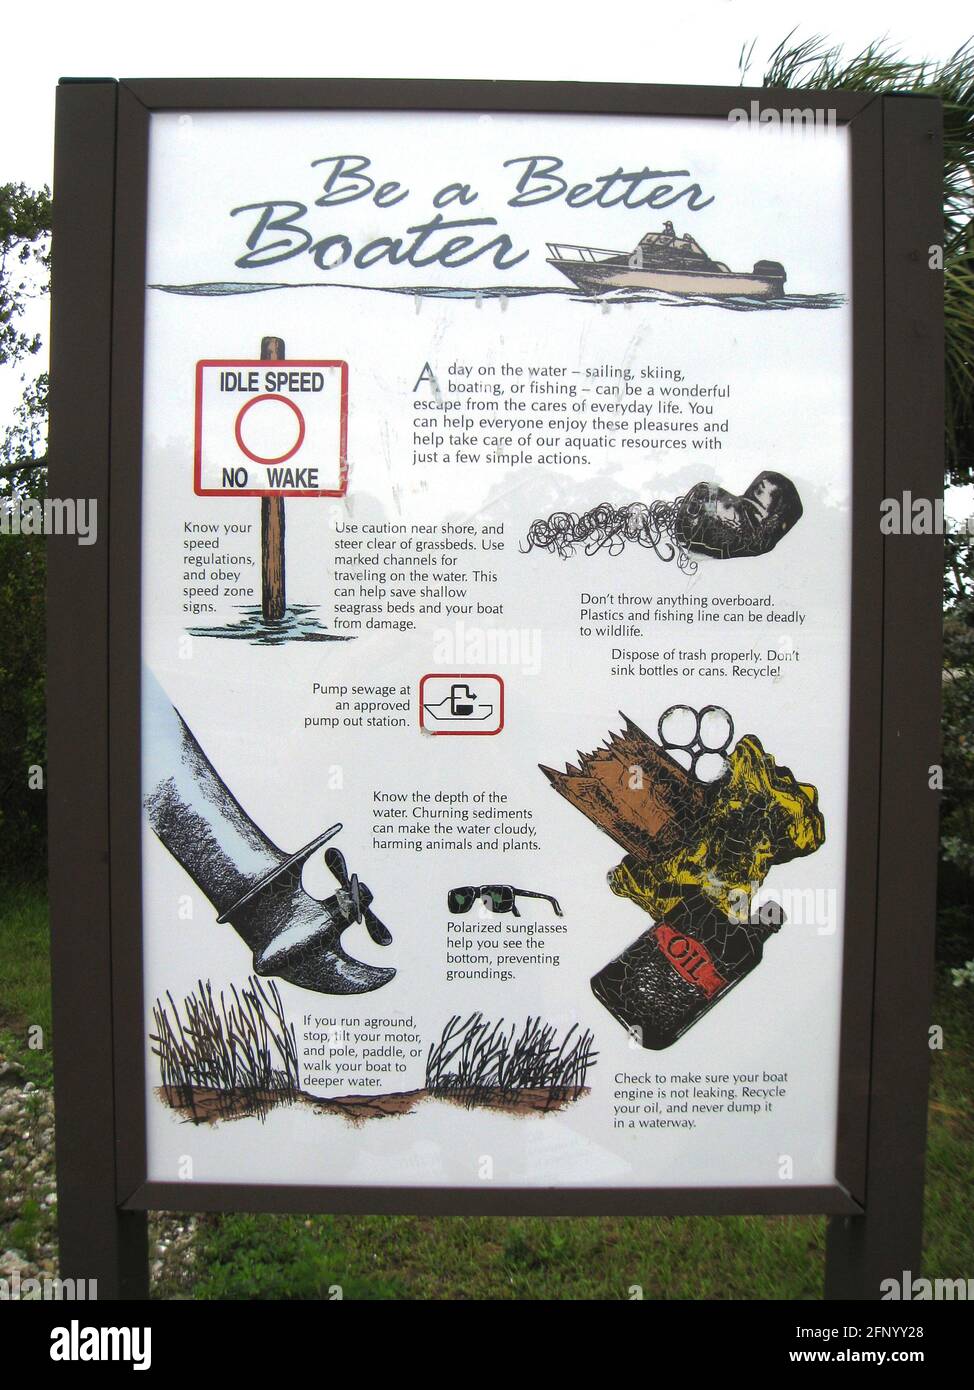 A 'Be A Better Boater' sign next to a public boat ramp in Florida, USA, lists ways for recreational boaters to enjoy their time on the water and also protect aquatic resources. Stock Photo